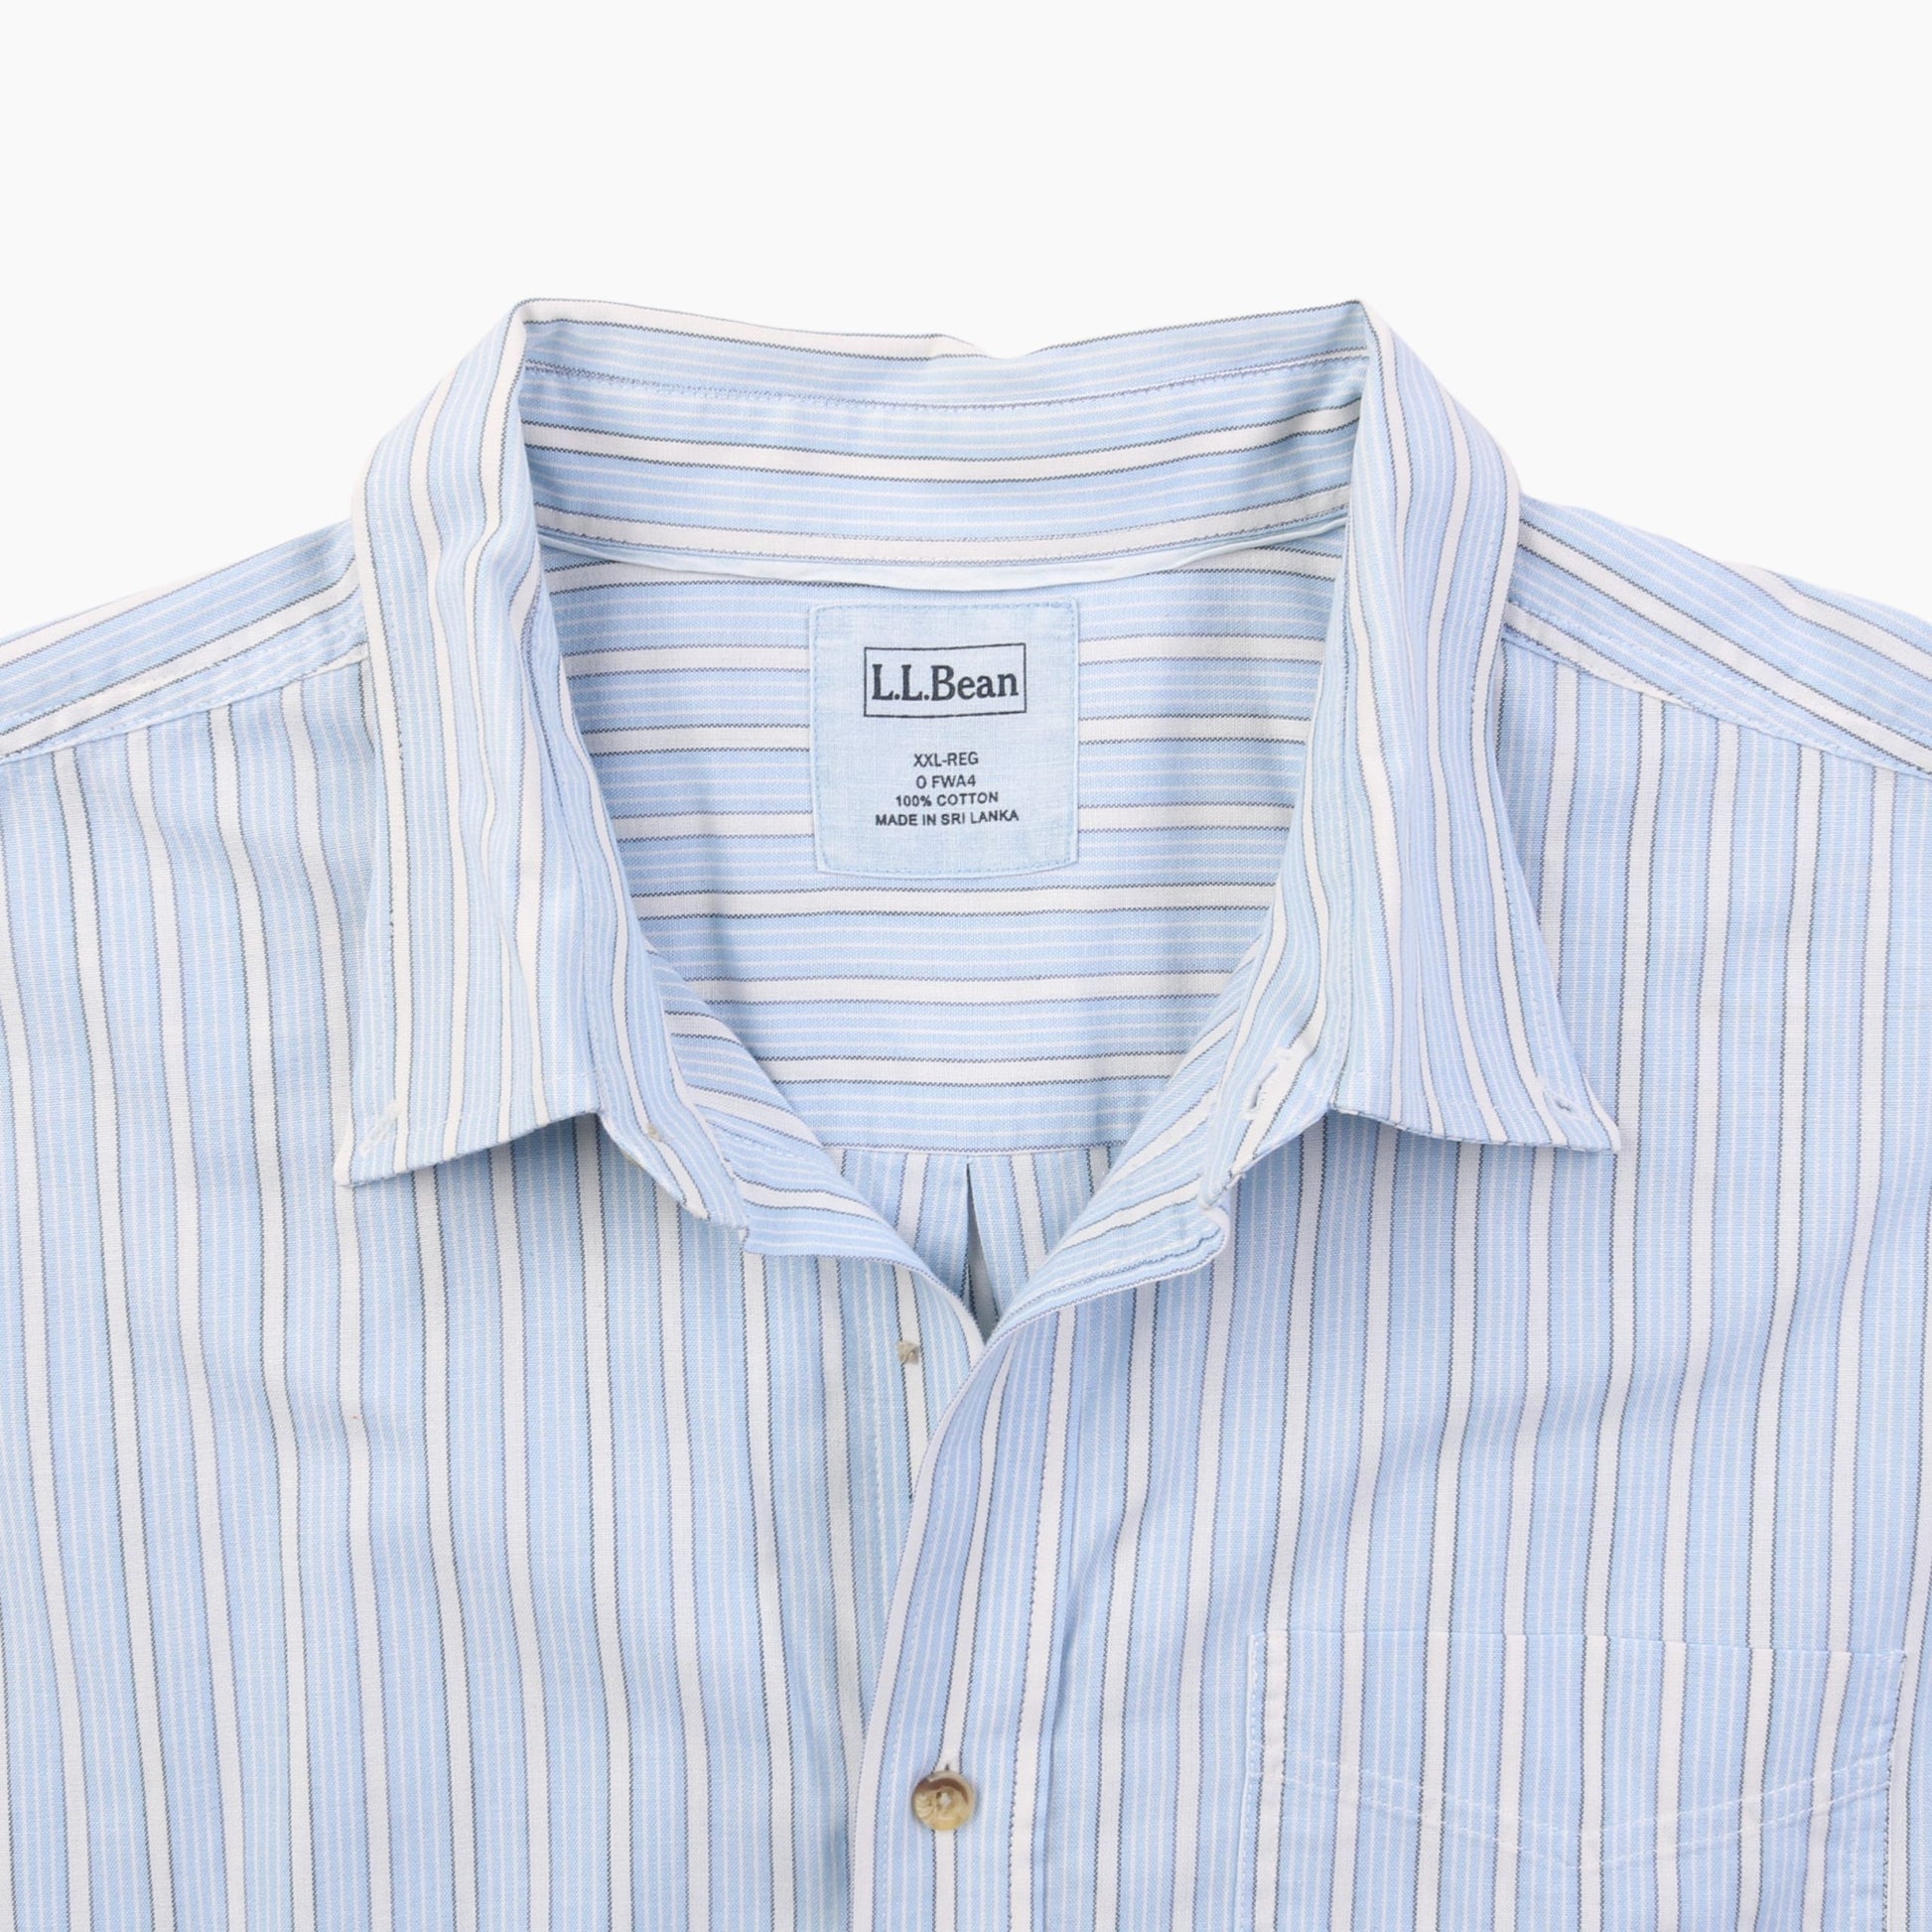 Vintage Shirt - Blue And White Stripe - American Madness